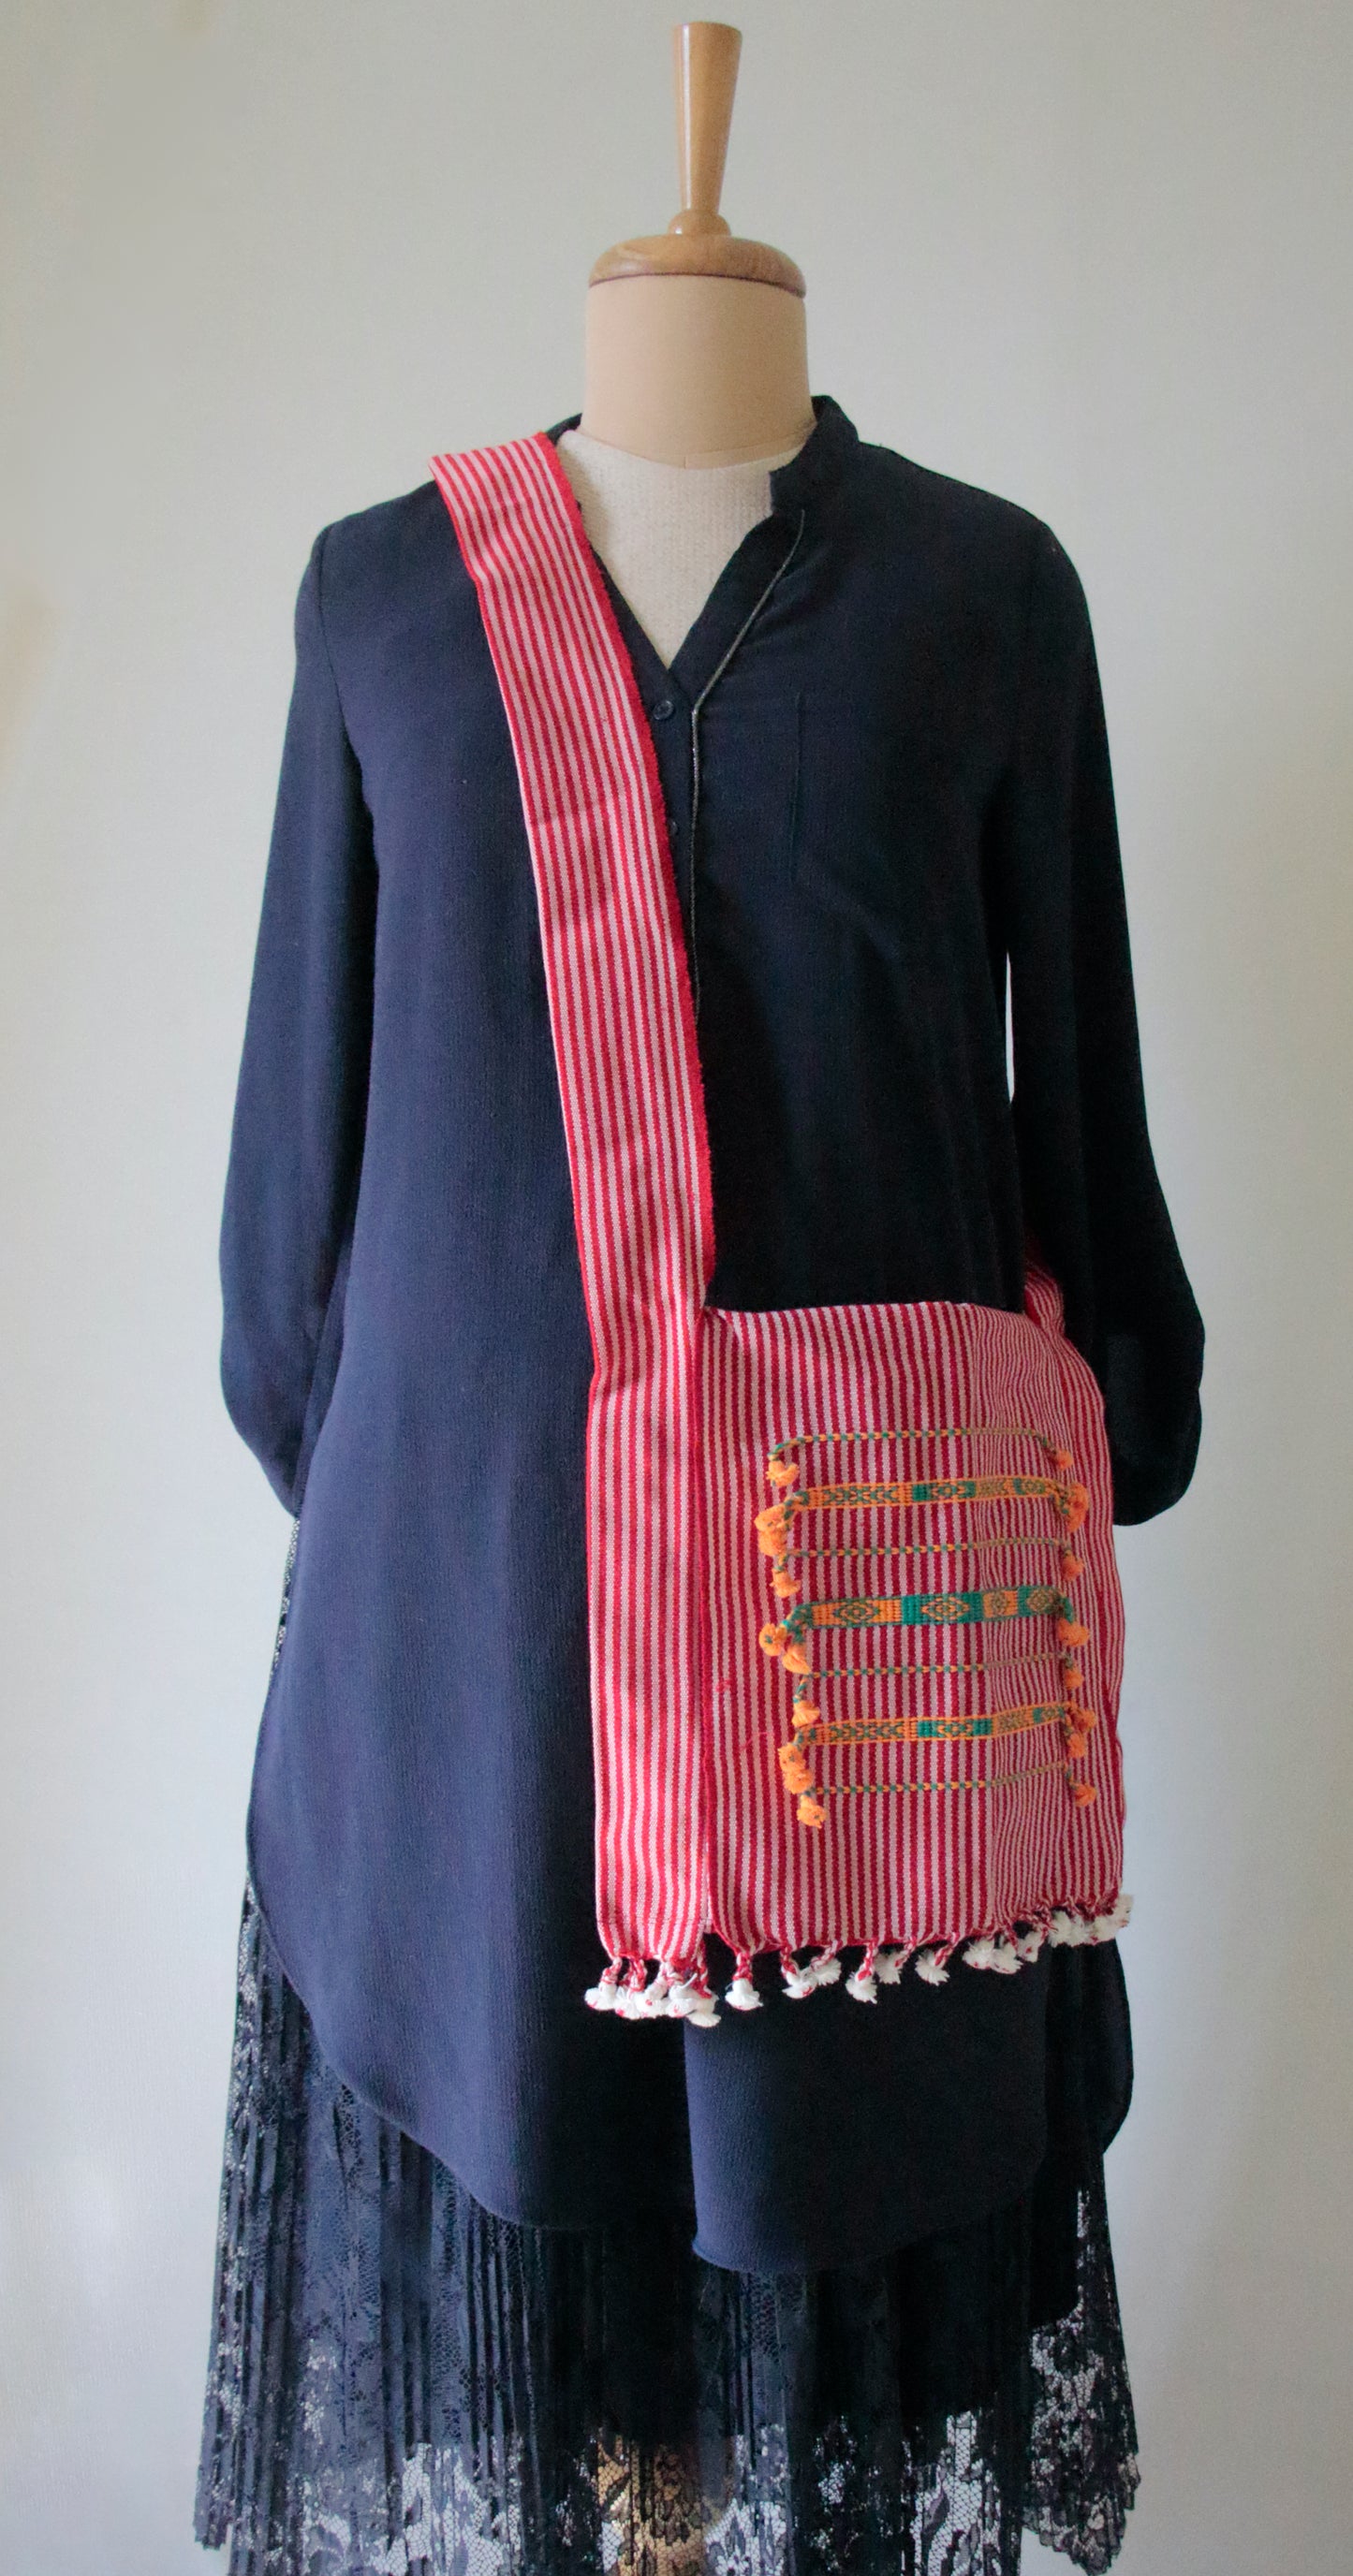 Artisanal Sling Bags made from Handwoven fabrics